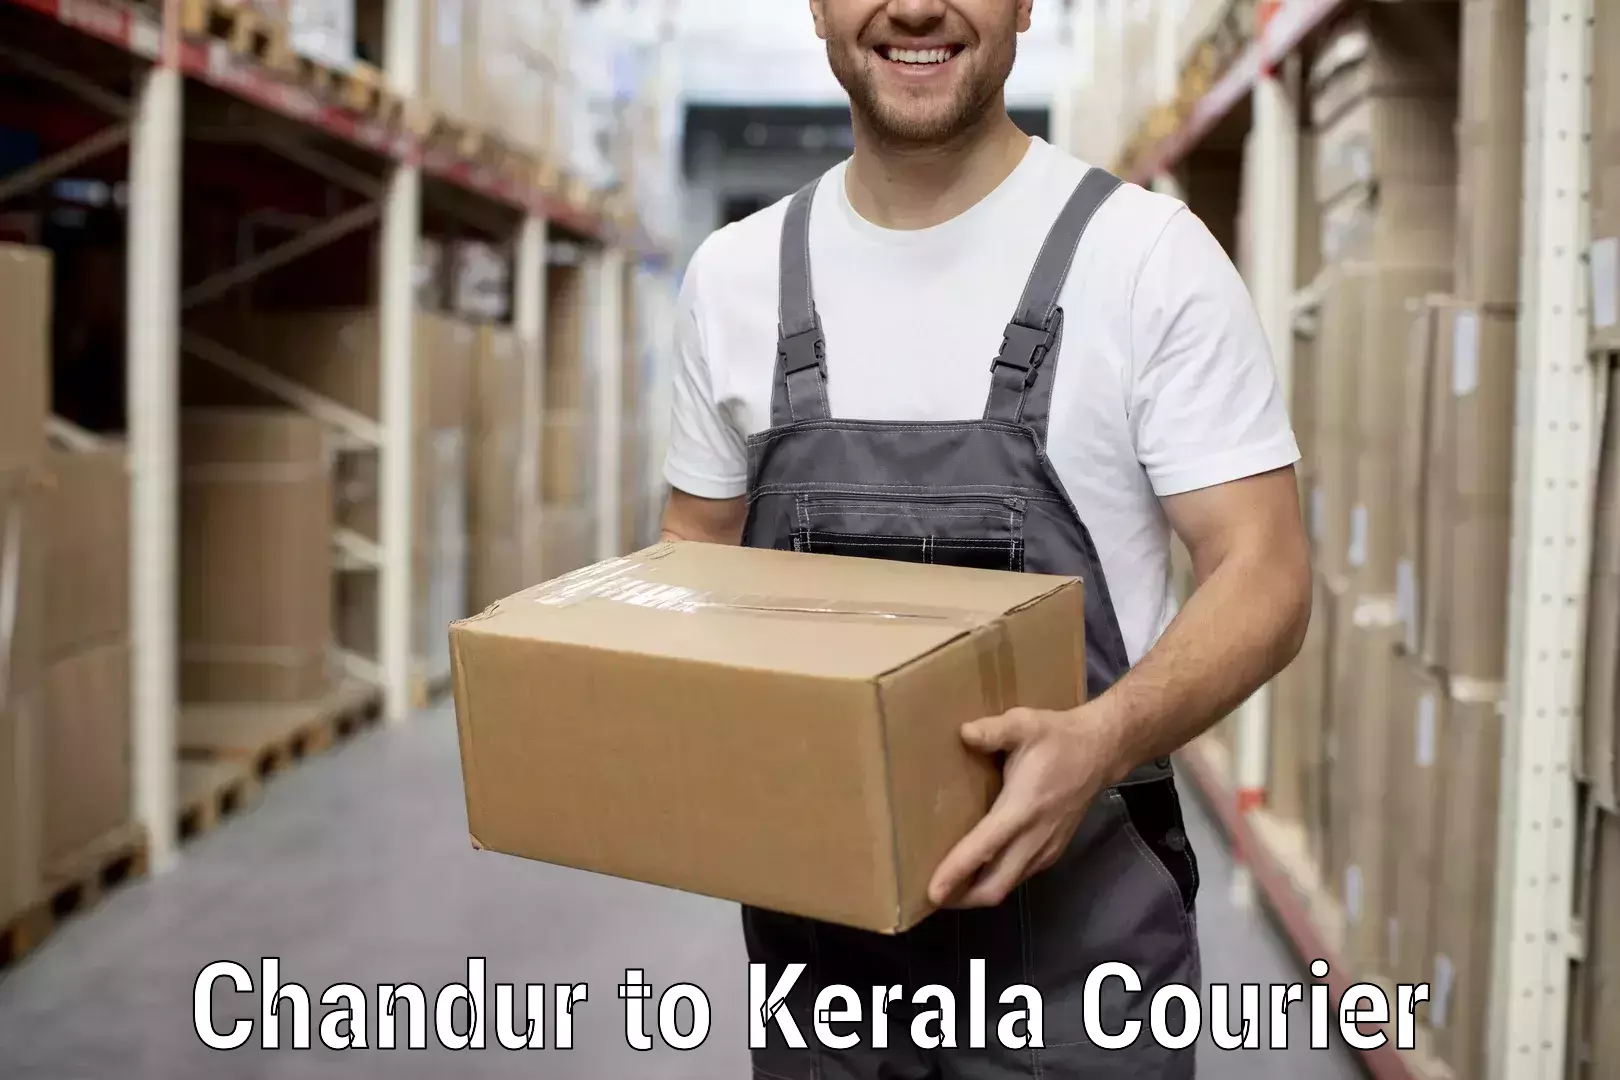 Professional moving strategies Chandur to Cochin University of Science and Technology